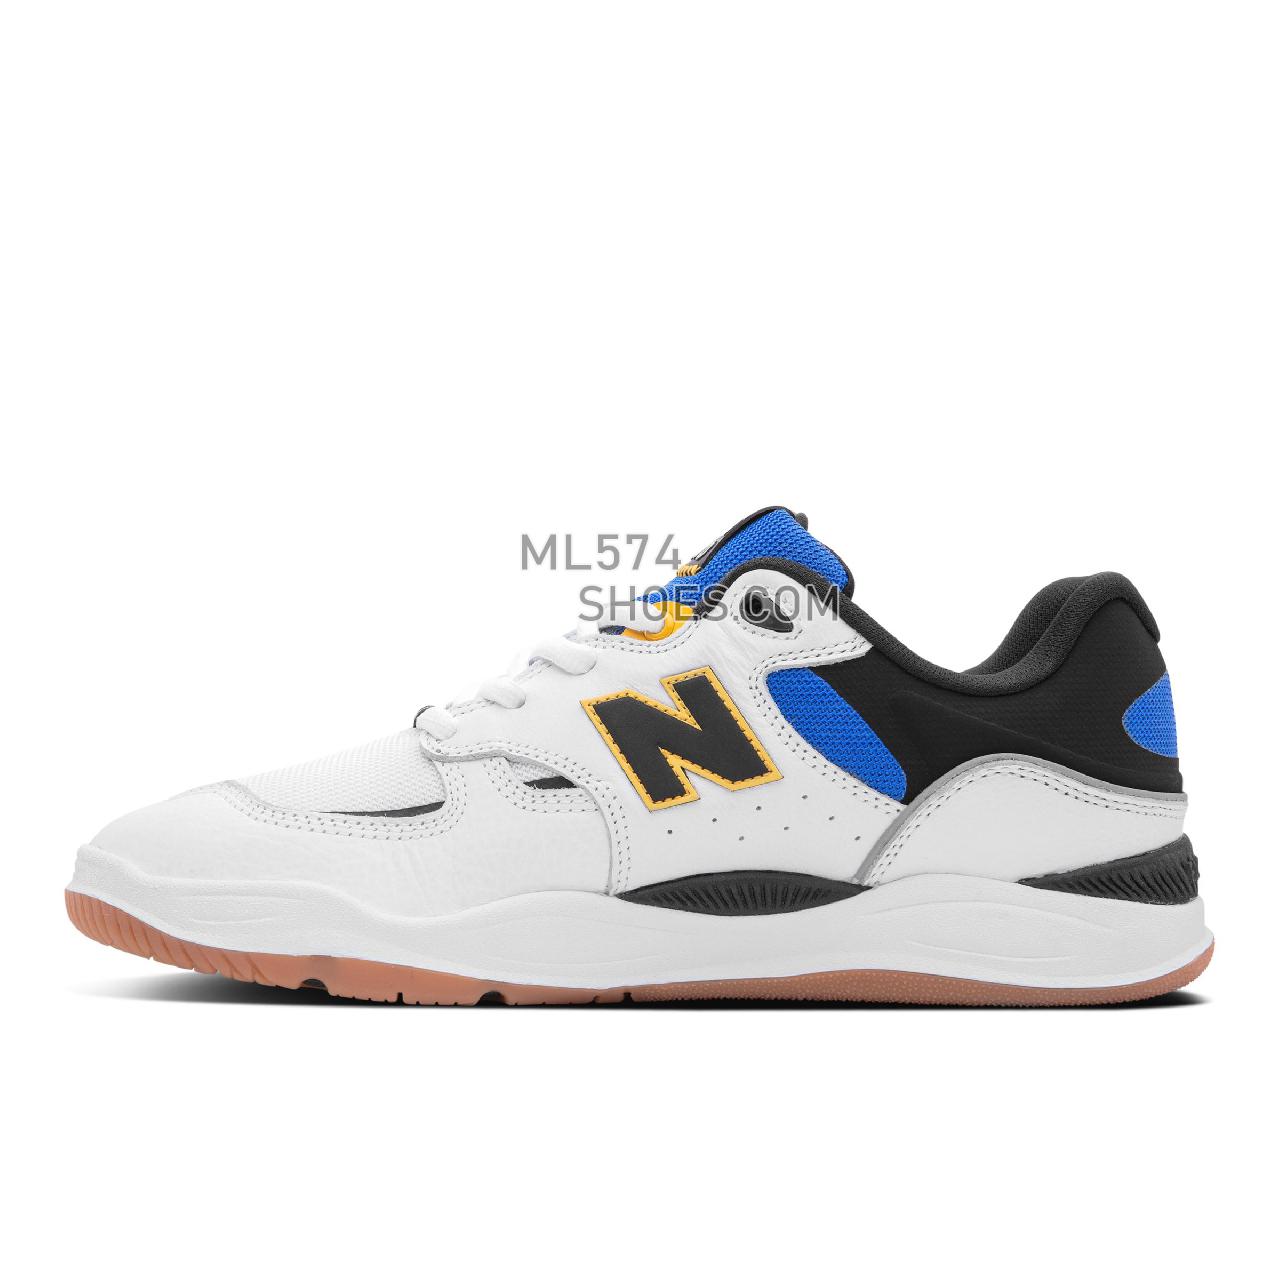 New Balance Numeric NM1010 - Unisex Men's Women's Classic Sneakers - White with Blue - NM1010WT